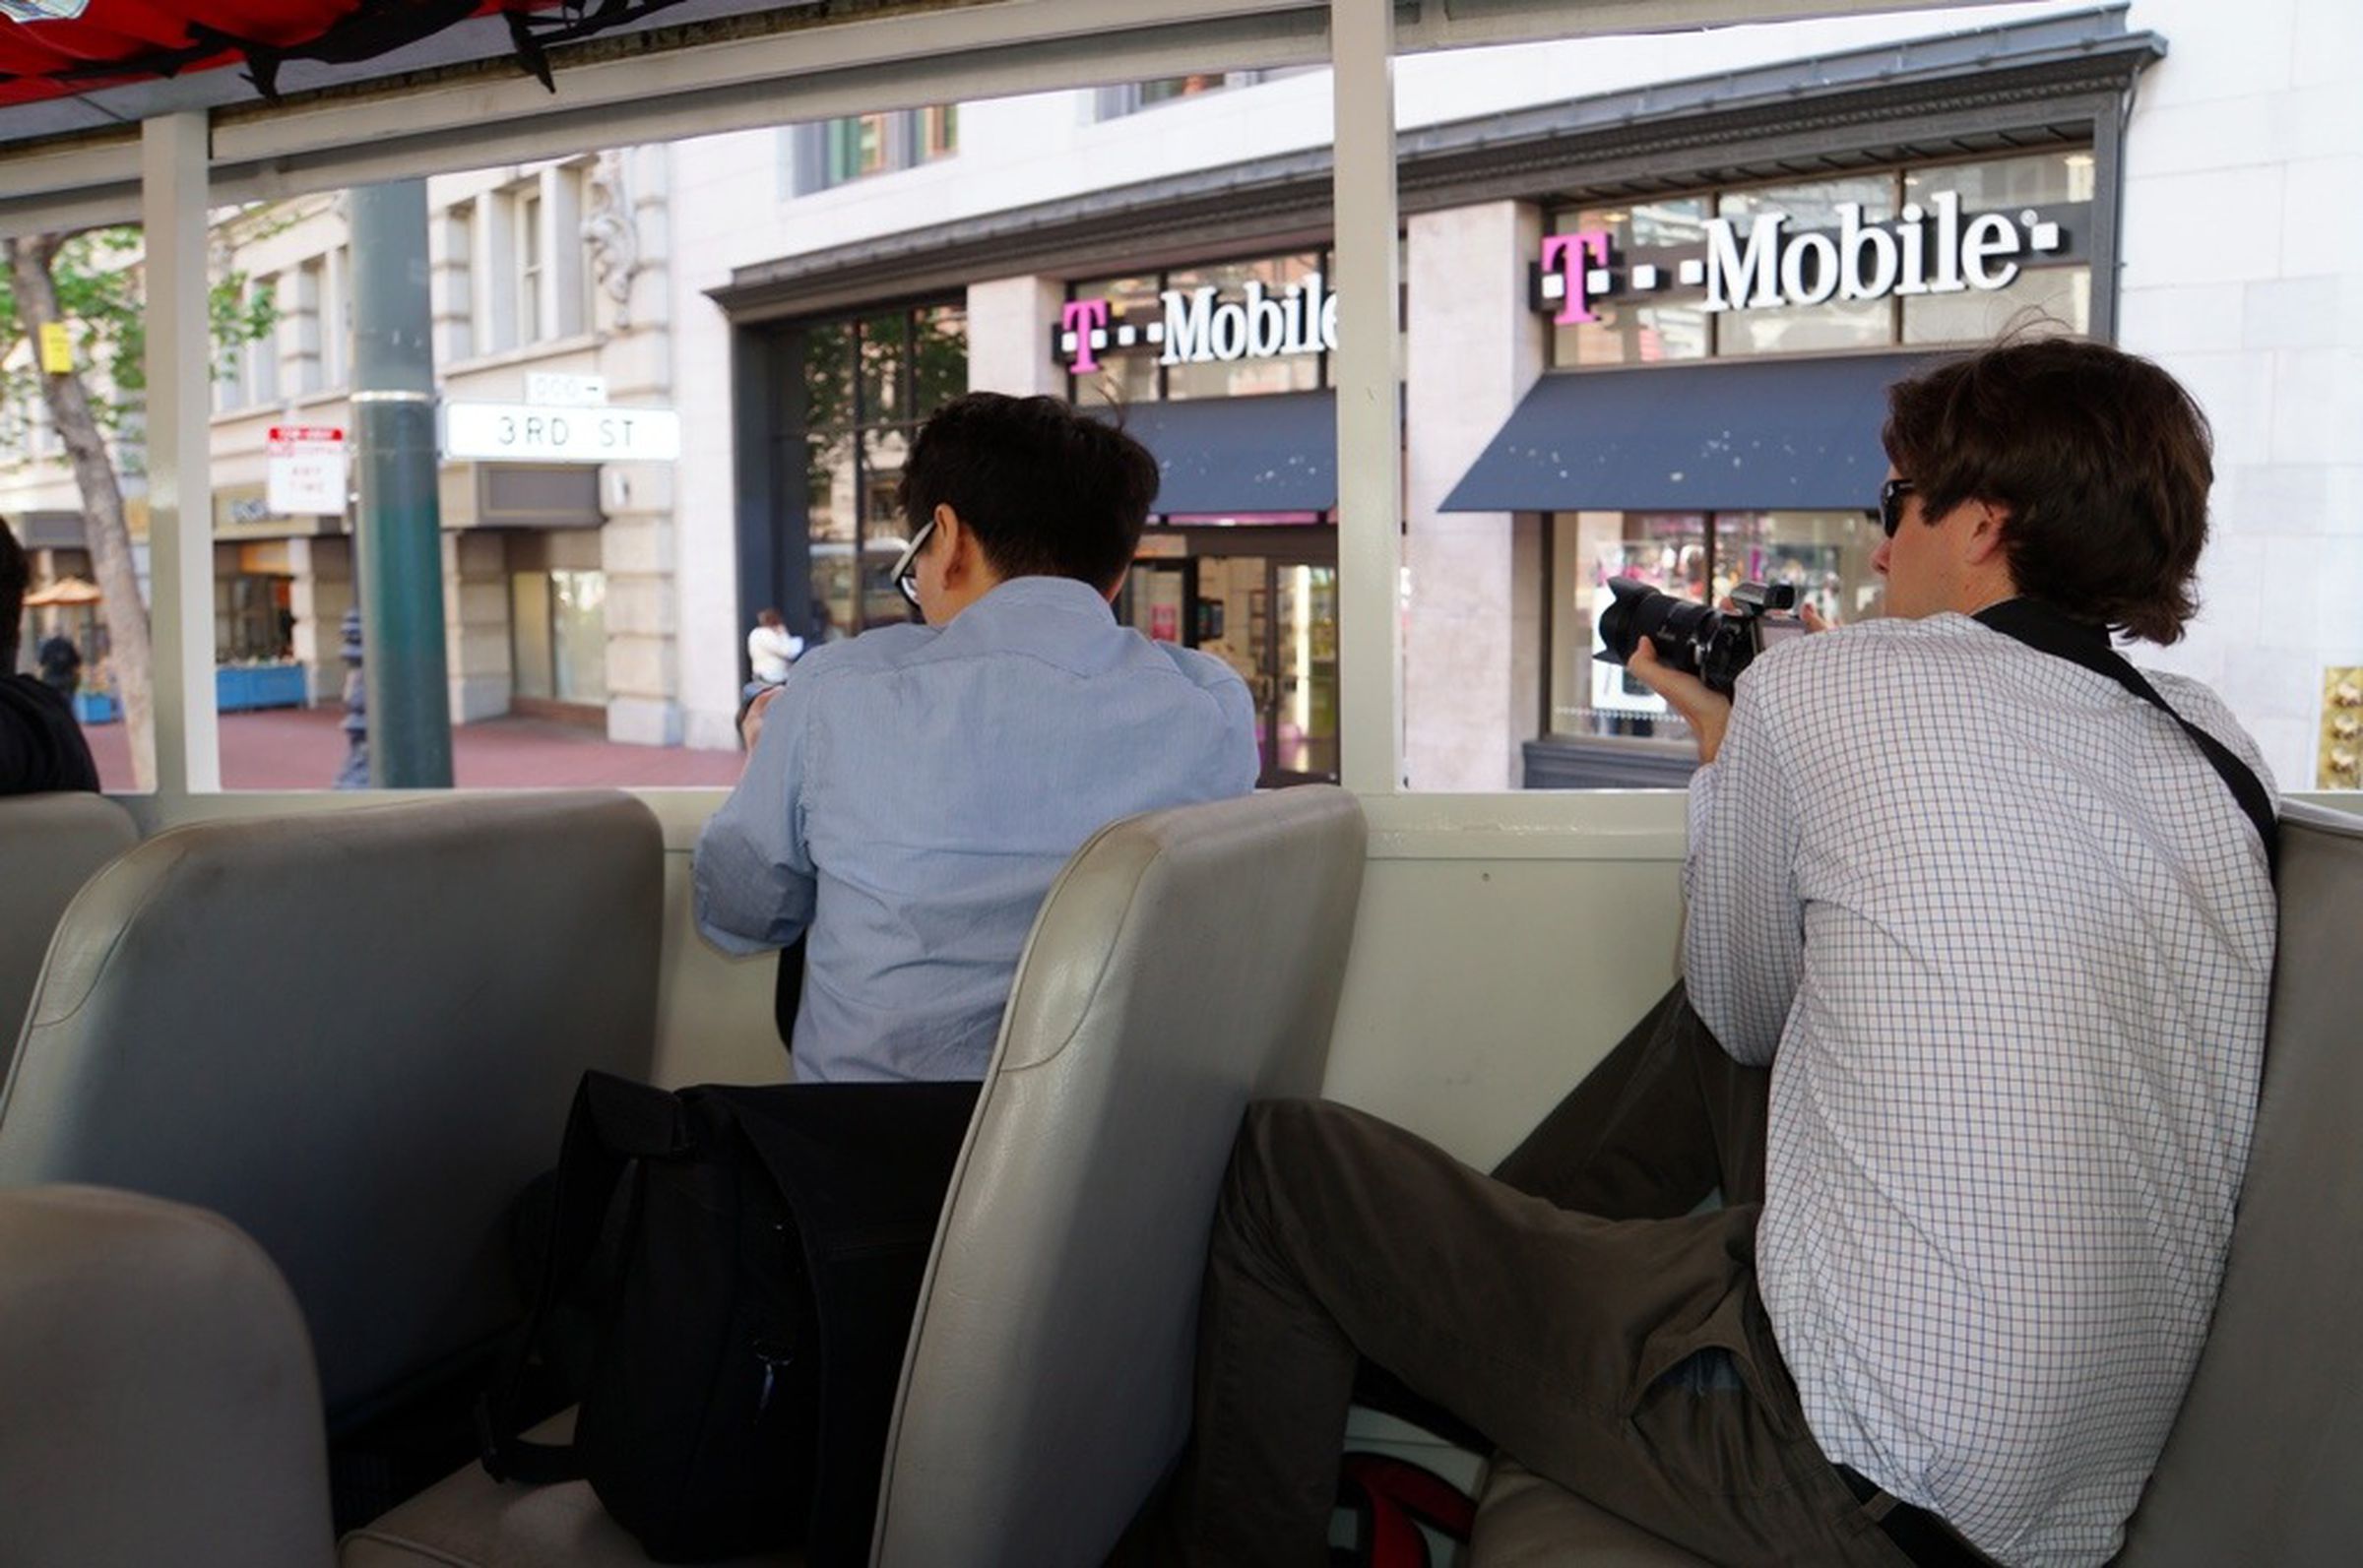 Sony NEX-F3 hands-on sample pictures